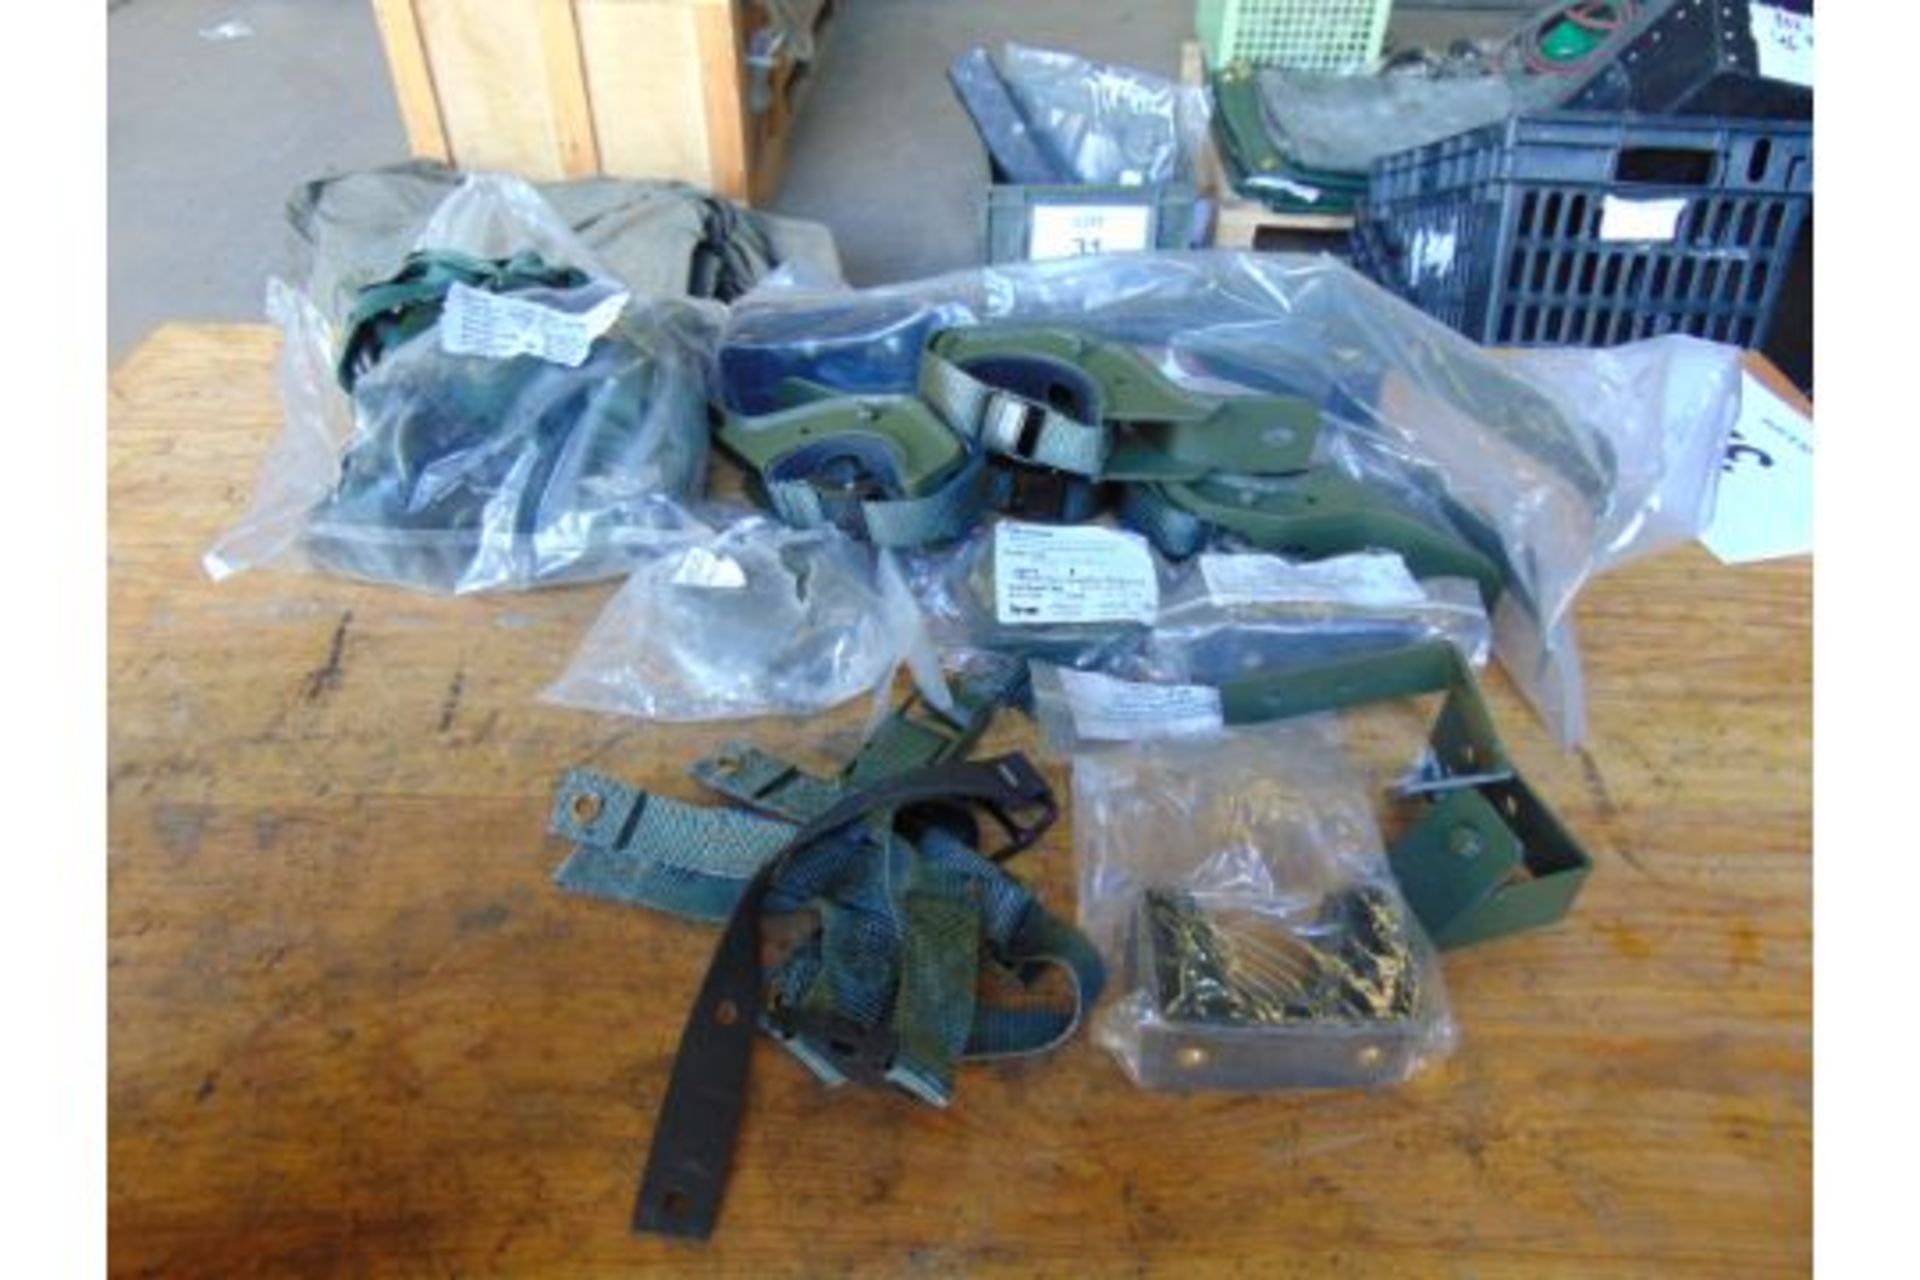 New Unissued WIMIK SA 80 Clips Launcher Covers, Stowage Straps, Barrel Clamps etc